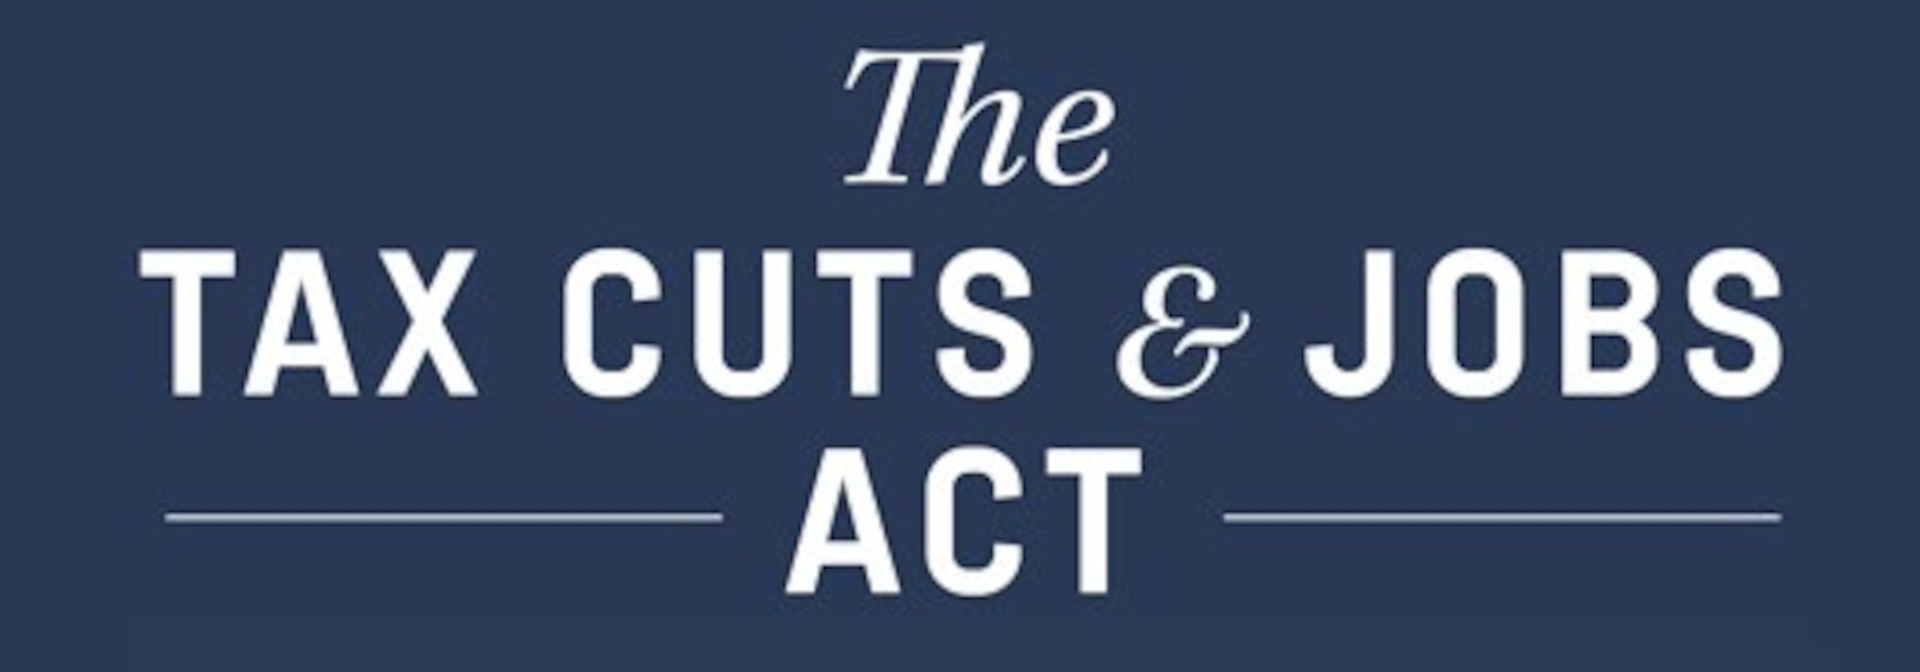 The Tax Cuts and Jobs Act, passed December 2017, eliminated a number of deductions that taxpayers have come to rely on. One of these was the moving expense deduction. The act eliminated the deduction for the tax year 2018 through the tax year 2025. However, the deduction will come back in 2026 unless Congress intervenes to eliminate it permanently. This change does not apply to military personnel, but does apply to Department of Defense civilian employees and contractors.